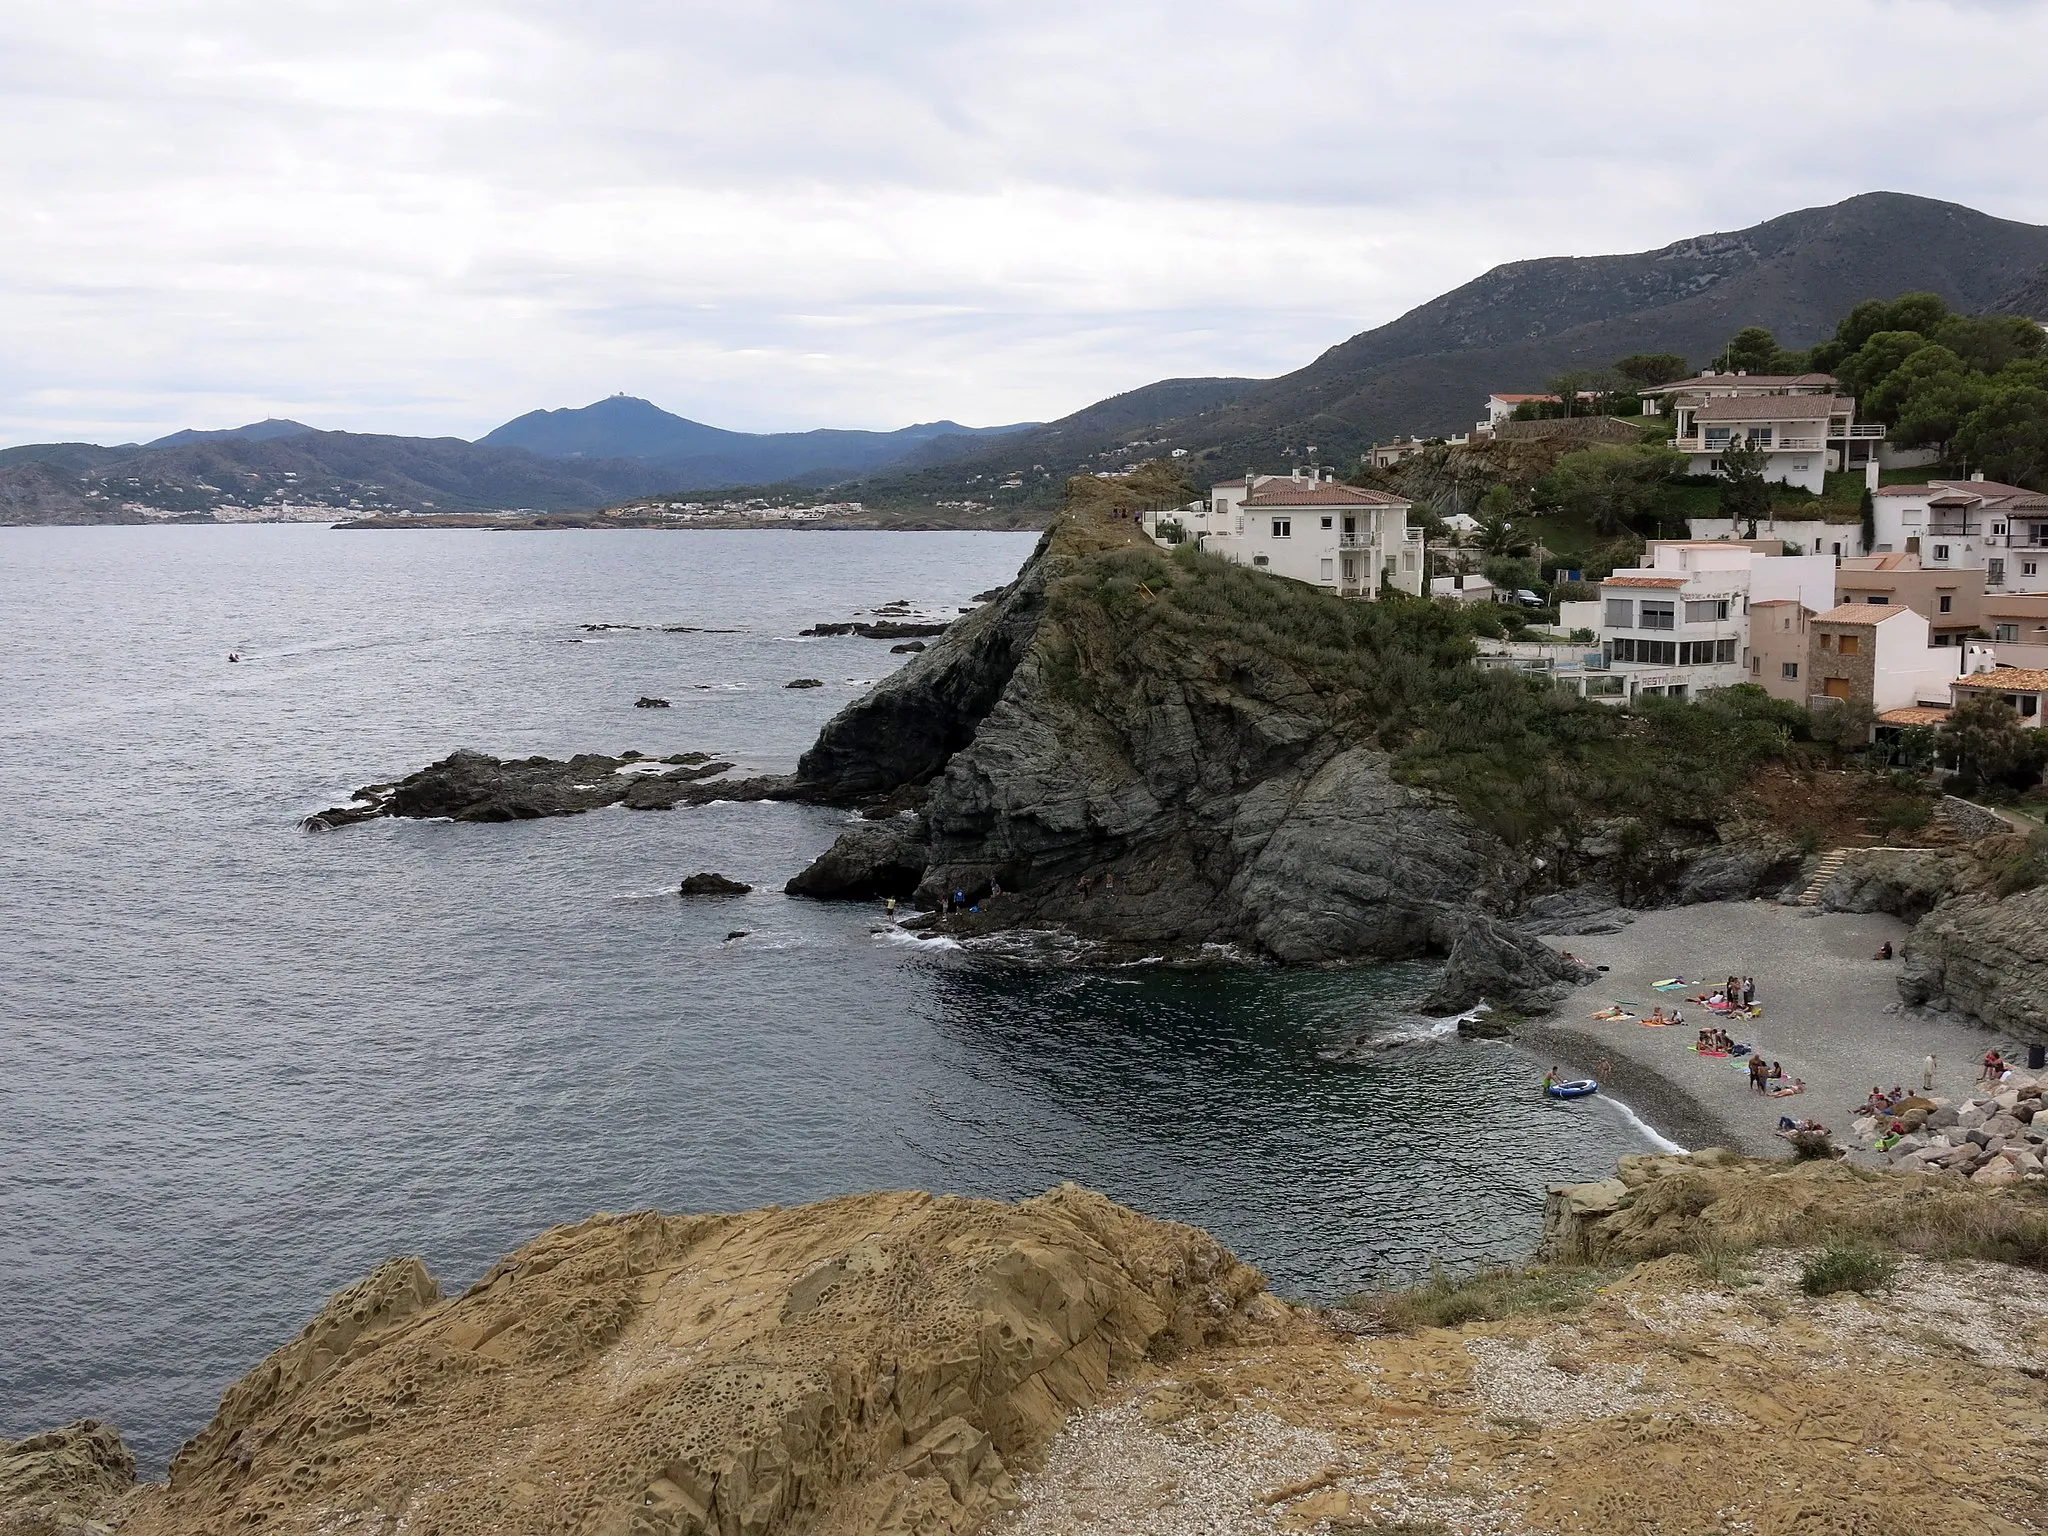 Photo showing: This is a a photo of a beach in Catalonia, Spain, with id: